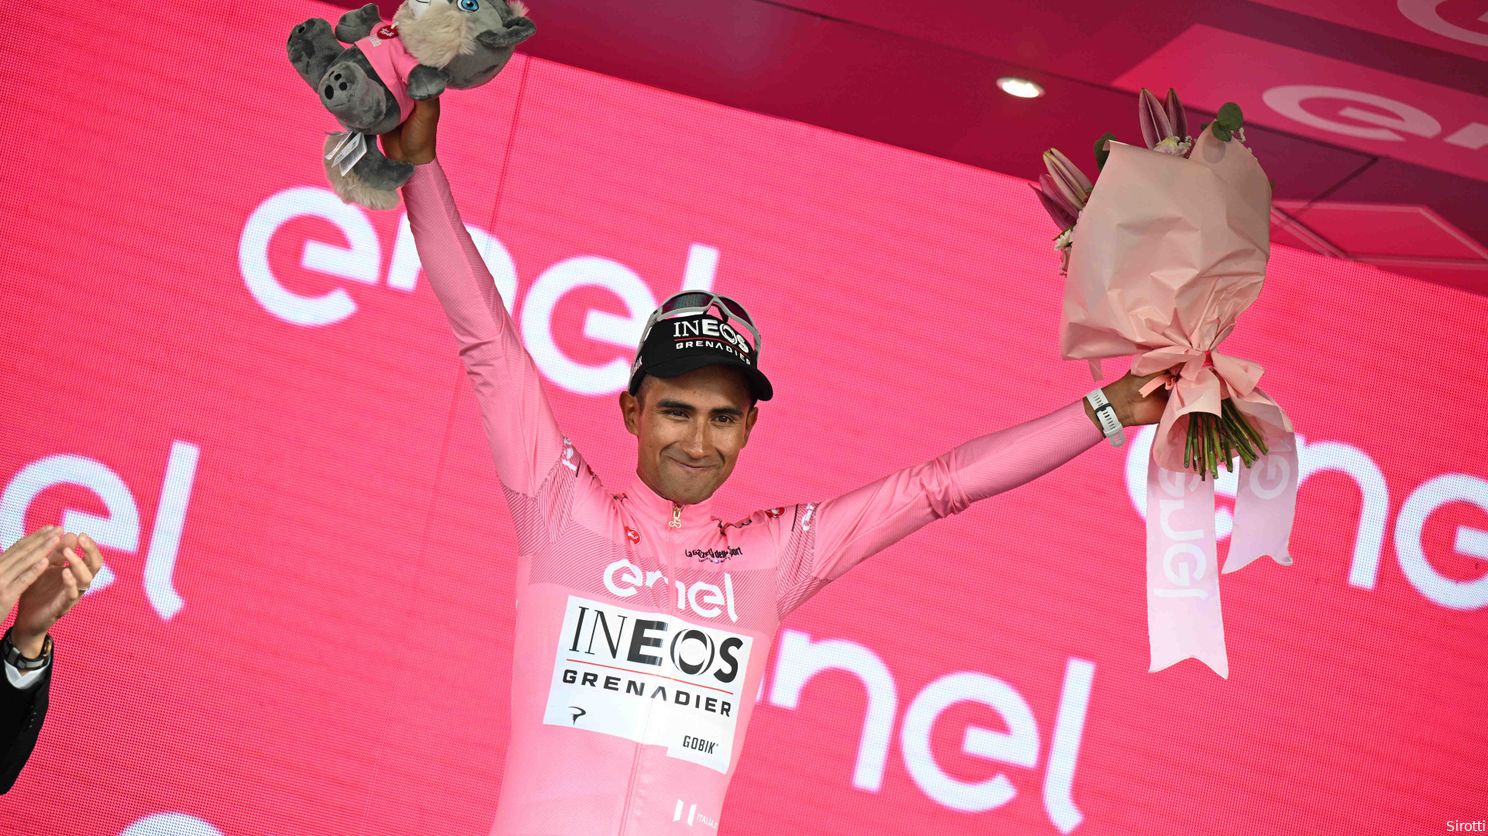 Surprising? Not to INEOS: They've planned for weeks to beat Pogacar with Narváez: "I'm in the form of my life"